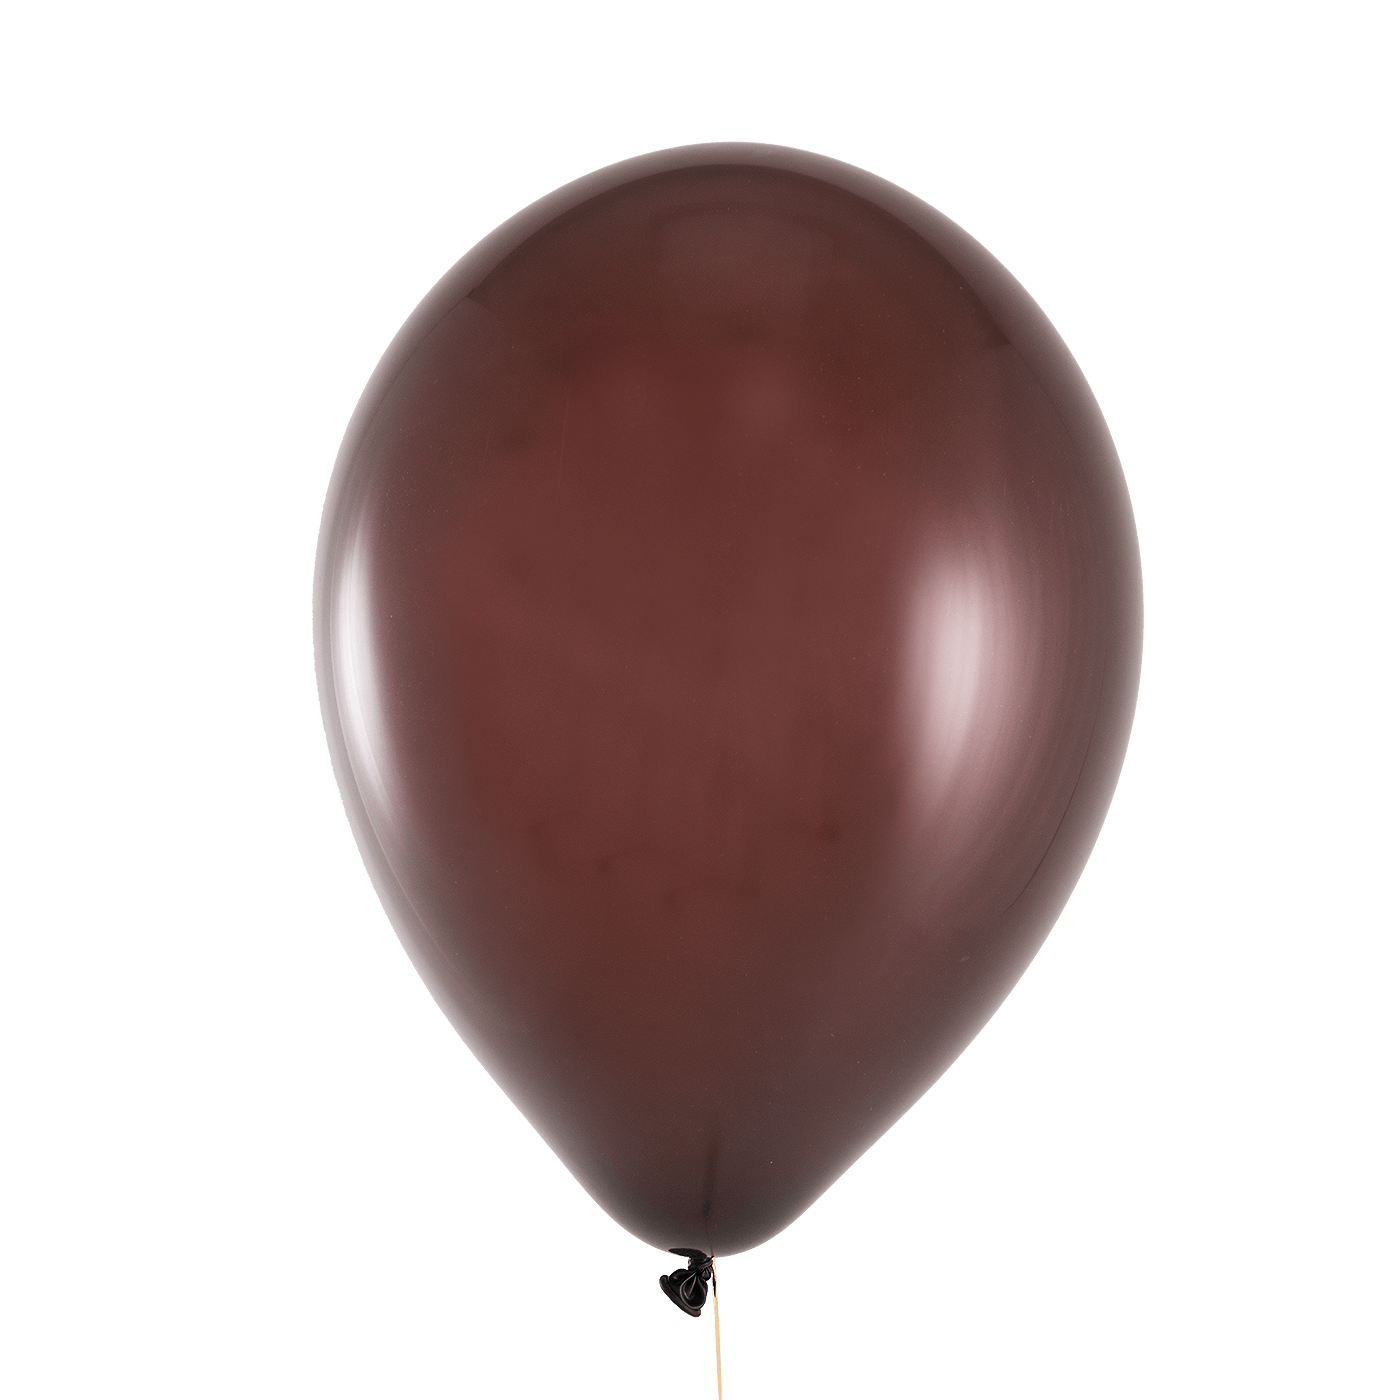 Brown Balloon Chocolate HQ Image Free PNG Image